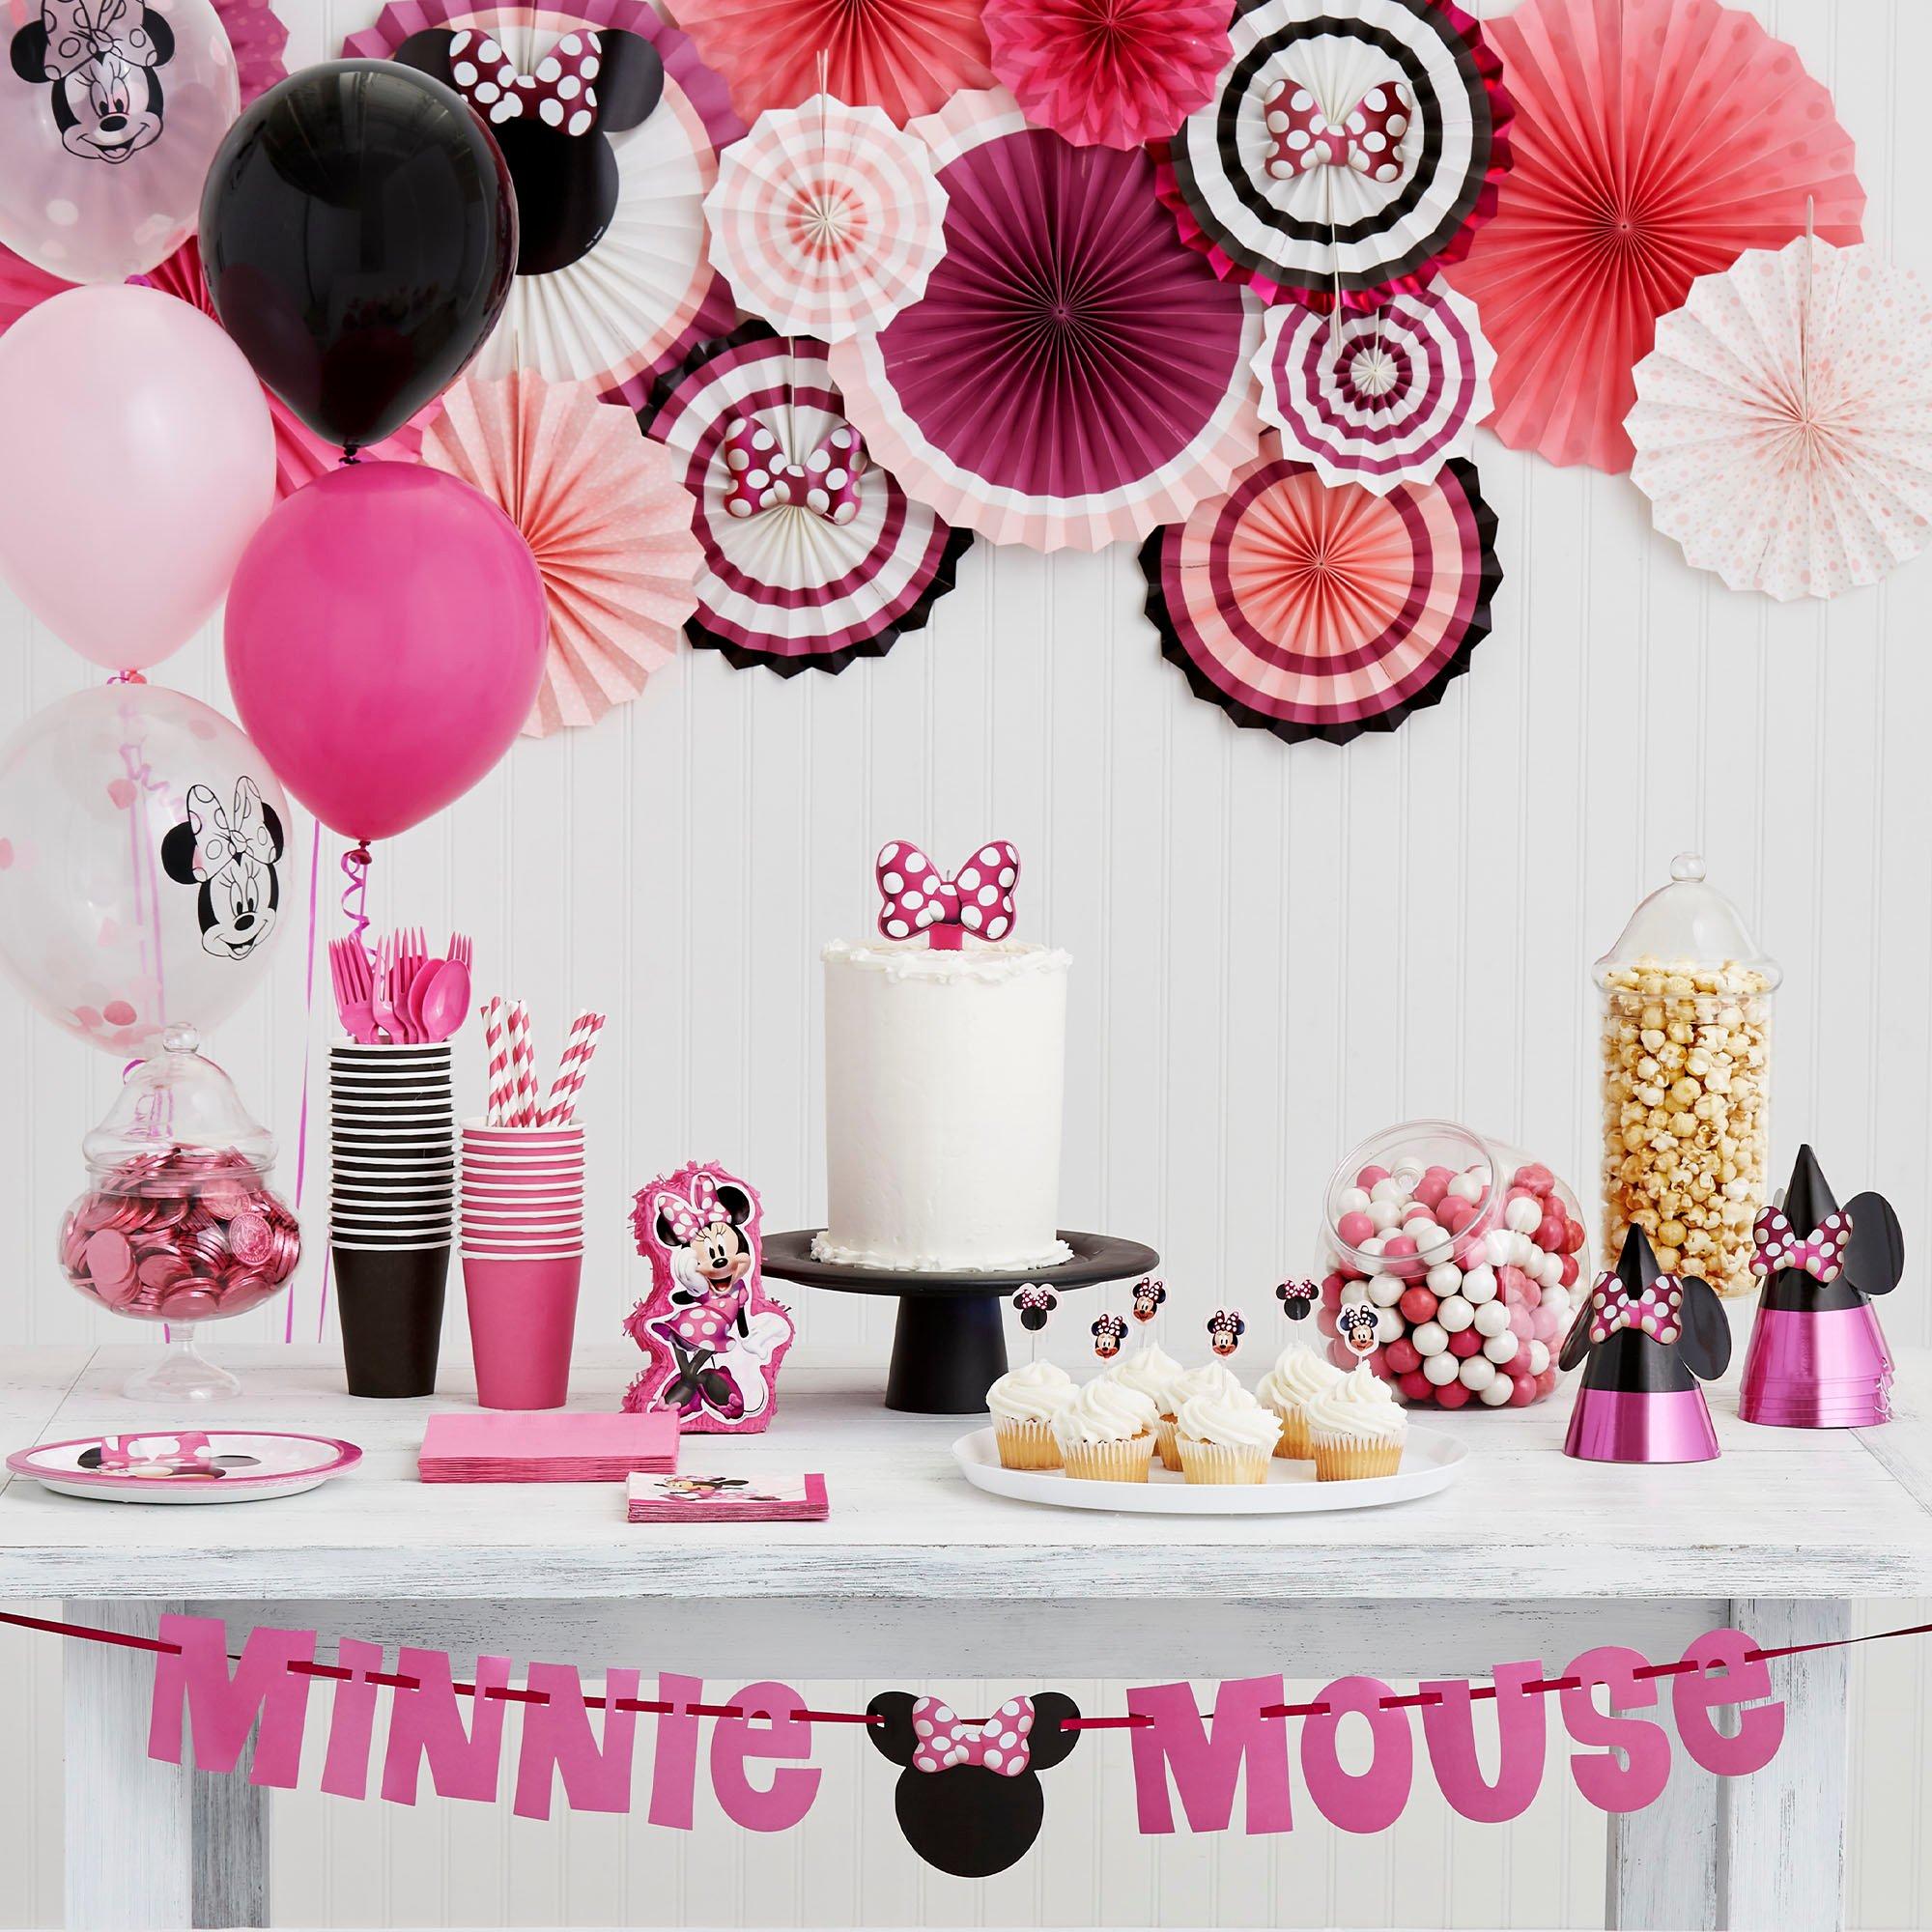 Minnie Mouse birthday party  Minnie mouse birthday decorations